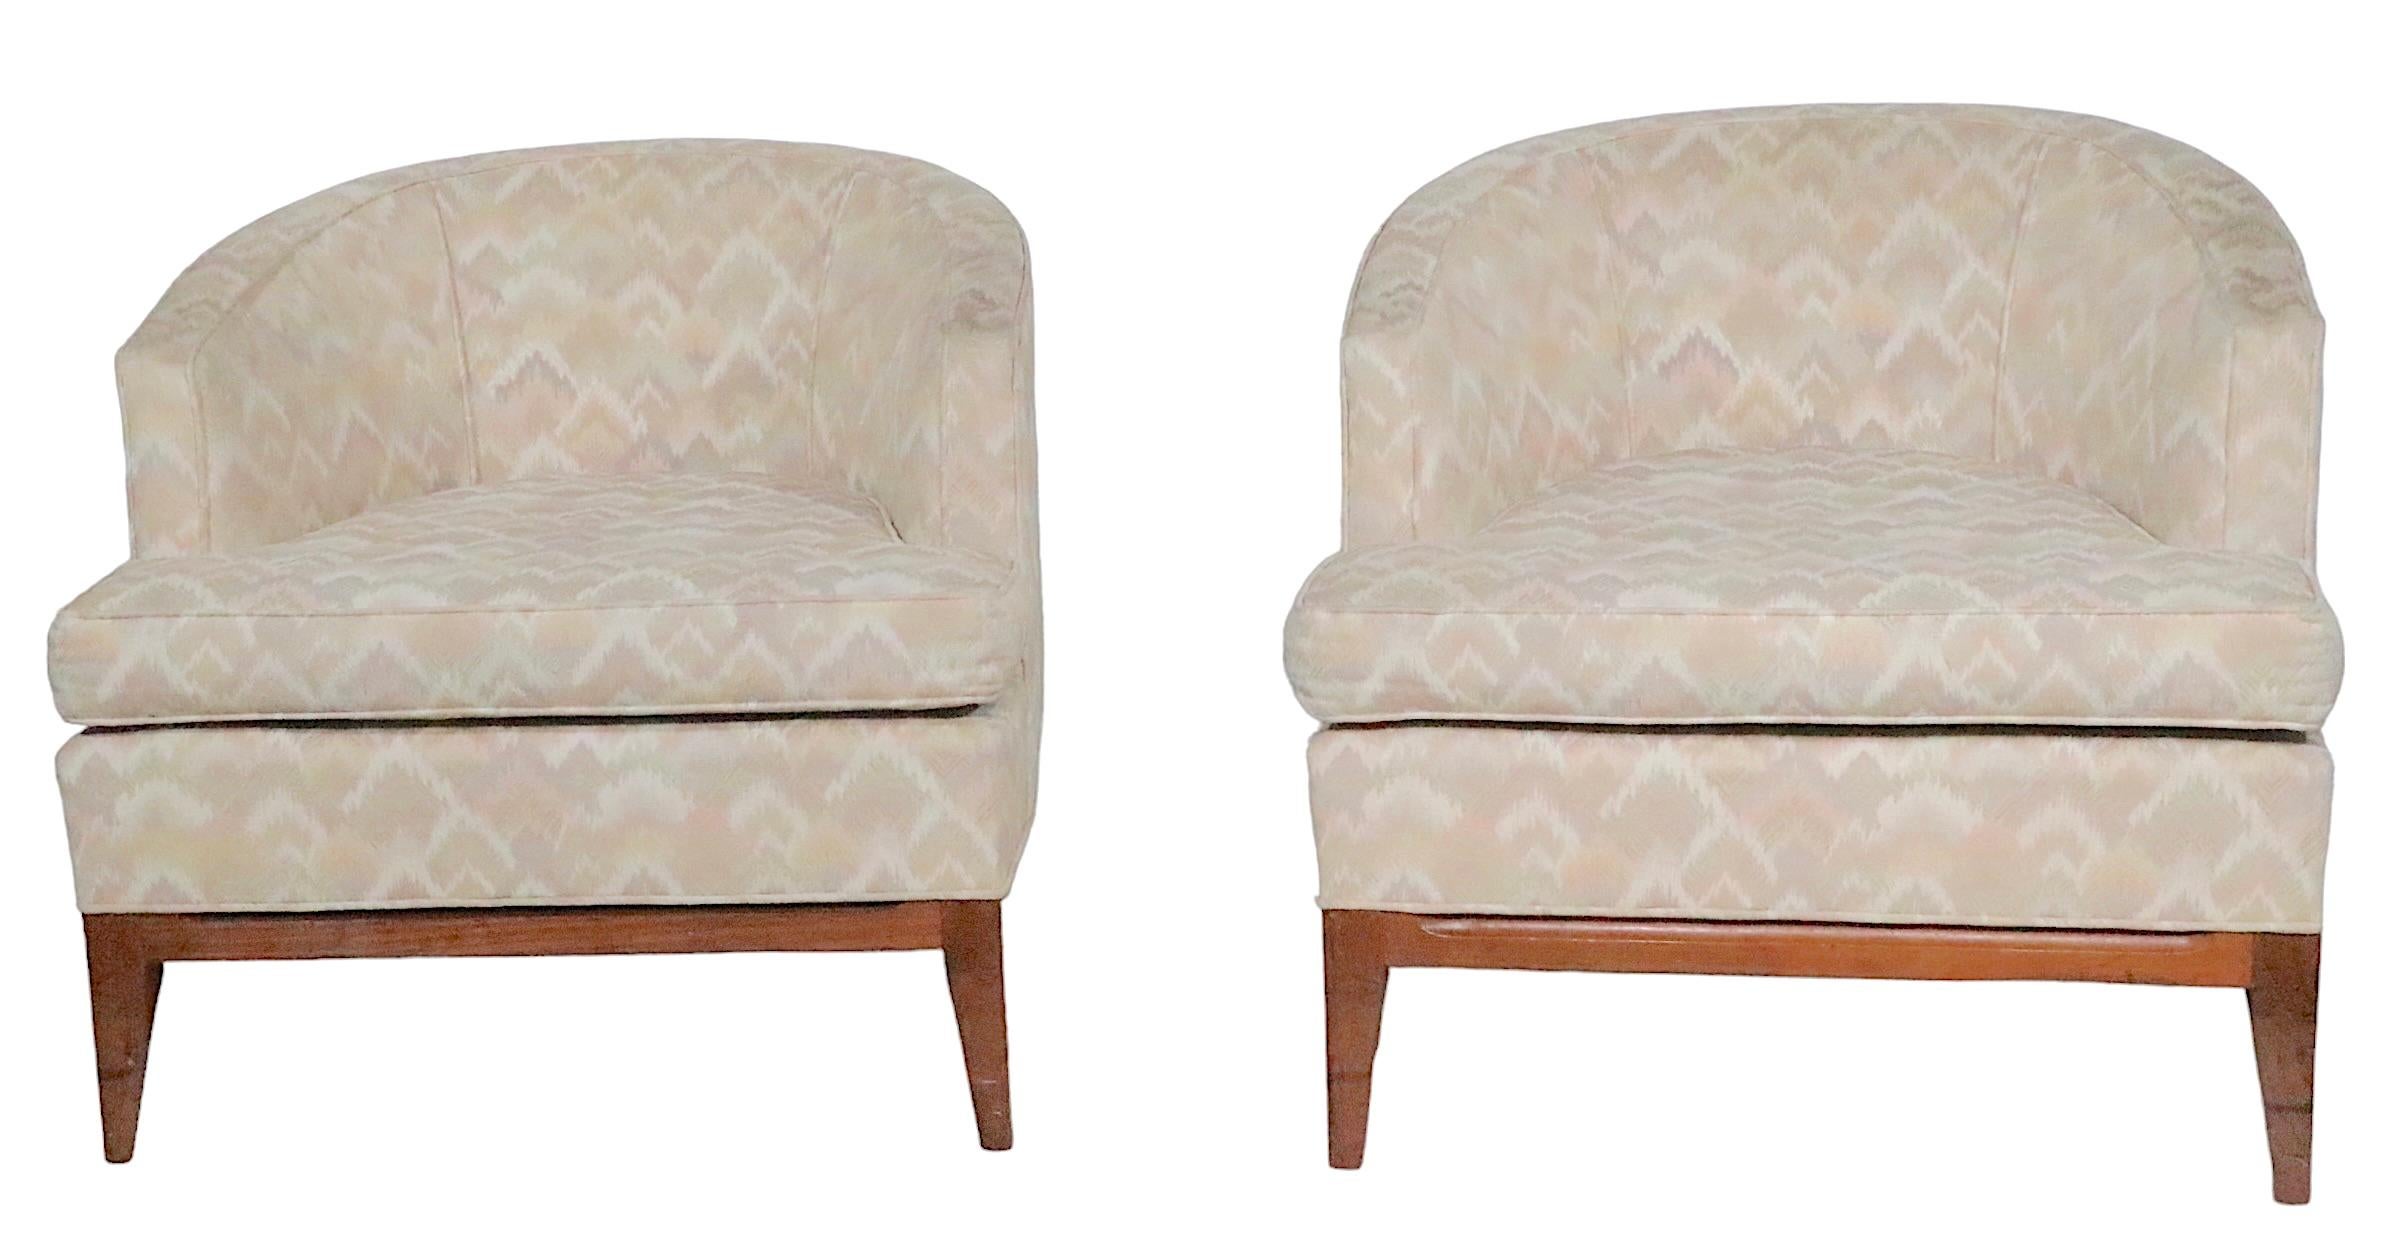 American Pair. Mid Century Tub Chairs After Robsjohn Gibbings, circa 1950 - 1960s For Sale